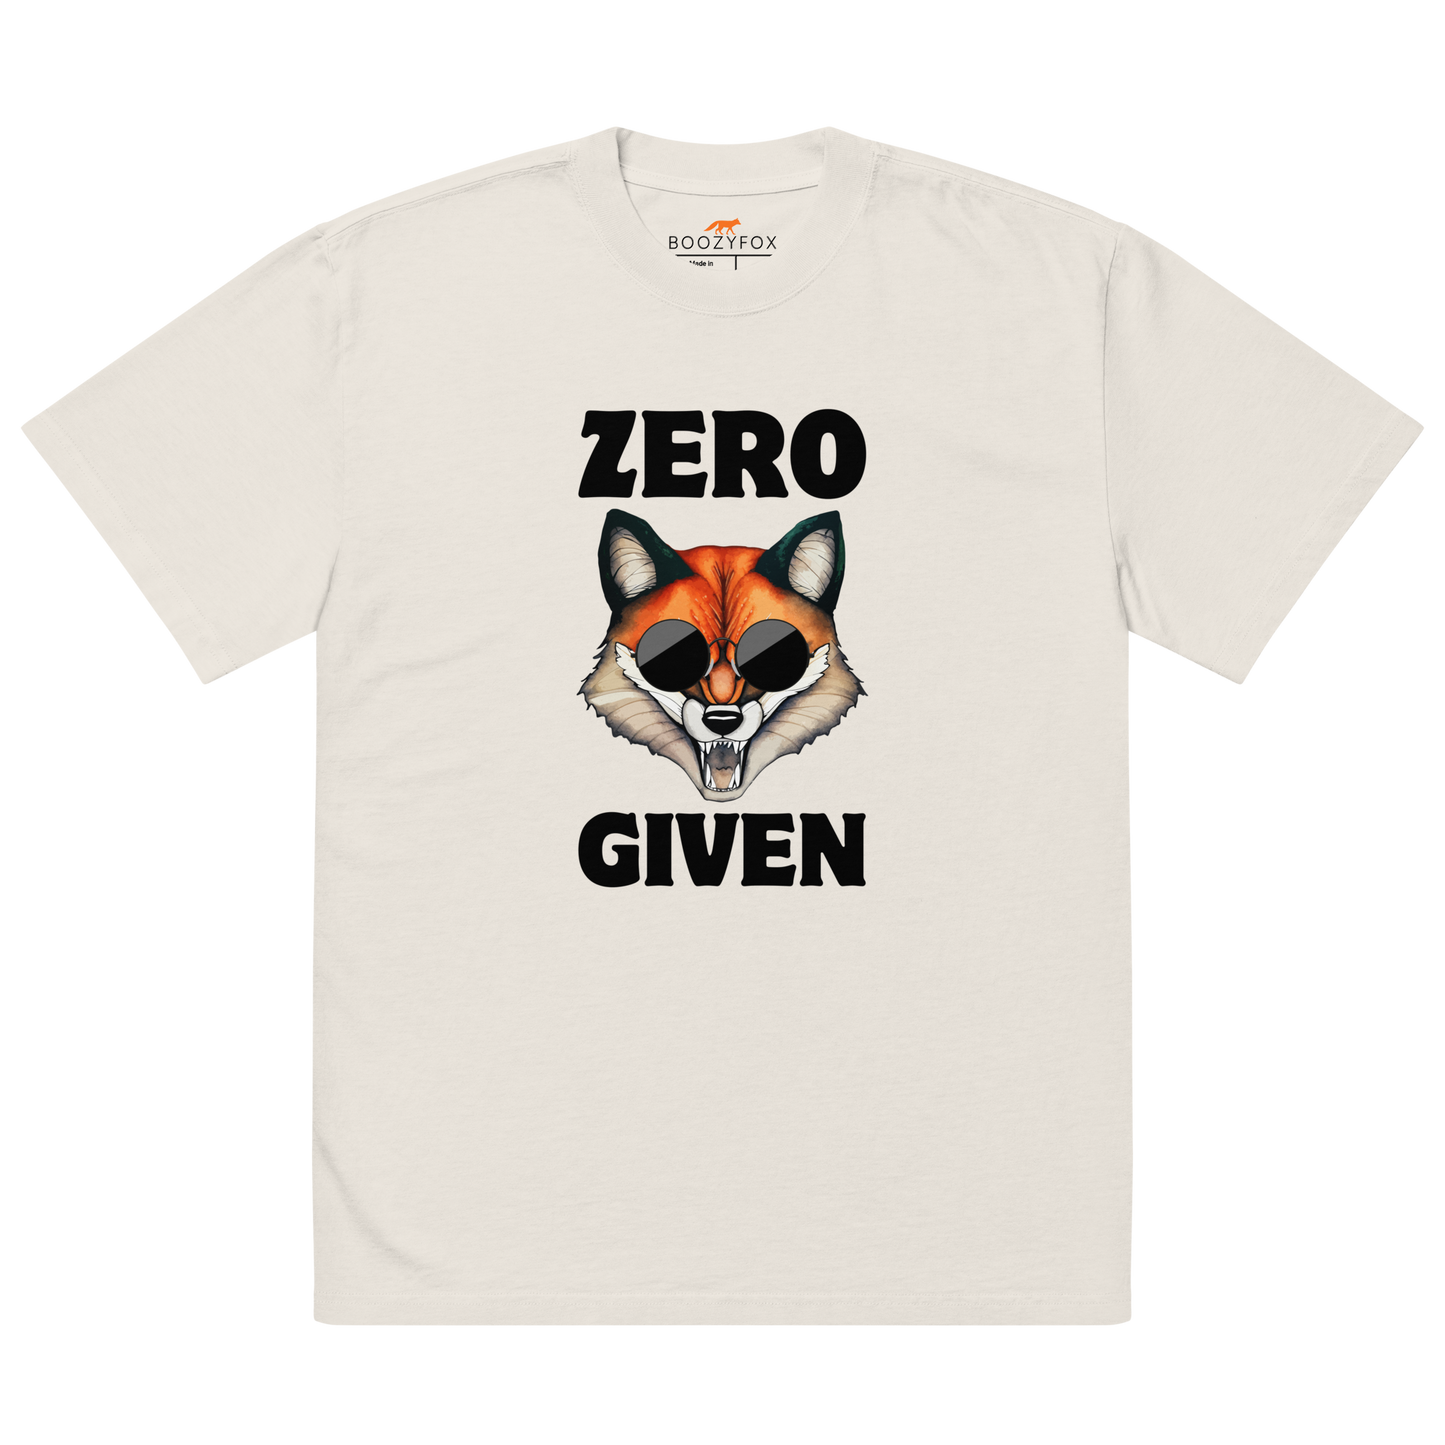 Faded Bone Fox Oversized T-Shirt featuring a Zero Fox Given graphic on the chest - Funny Graphic Fox Oversized Tees - Boozy Fox